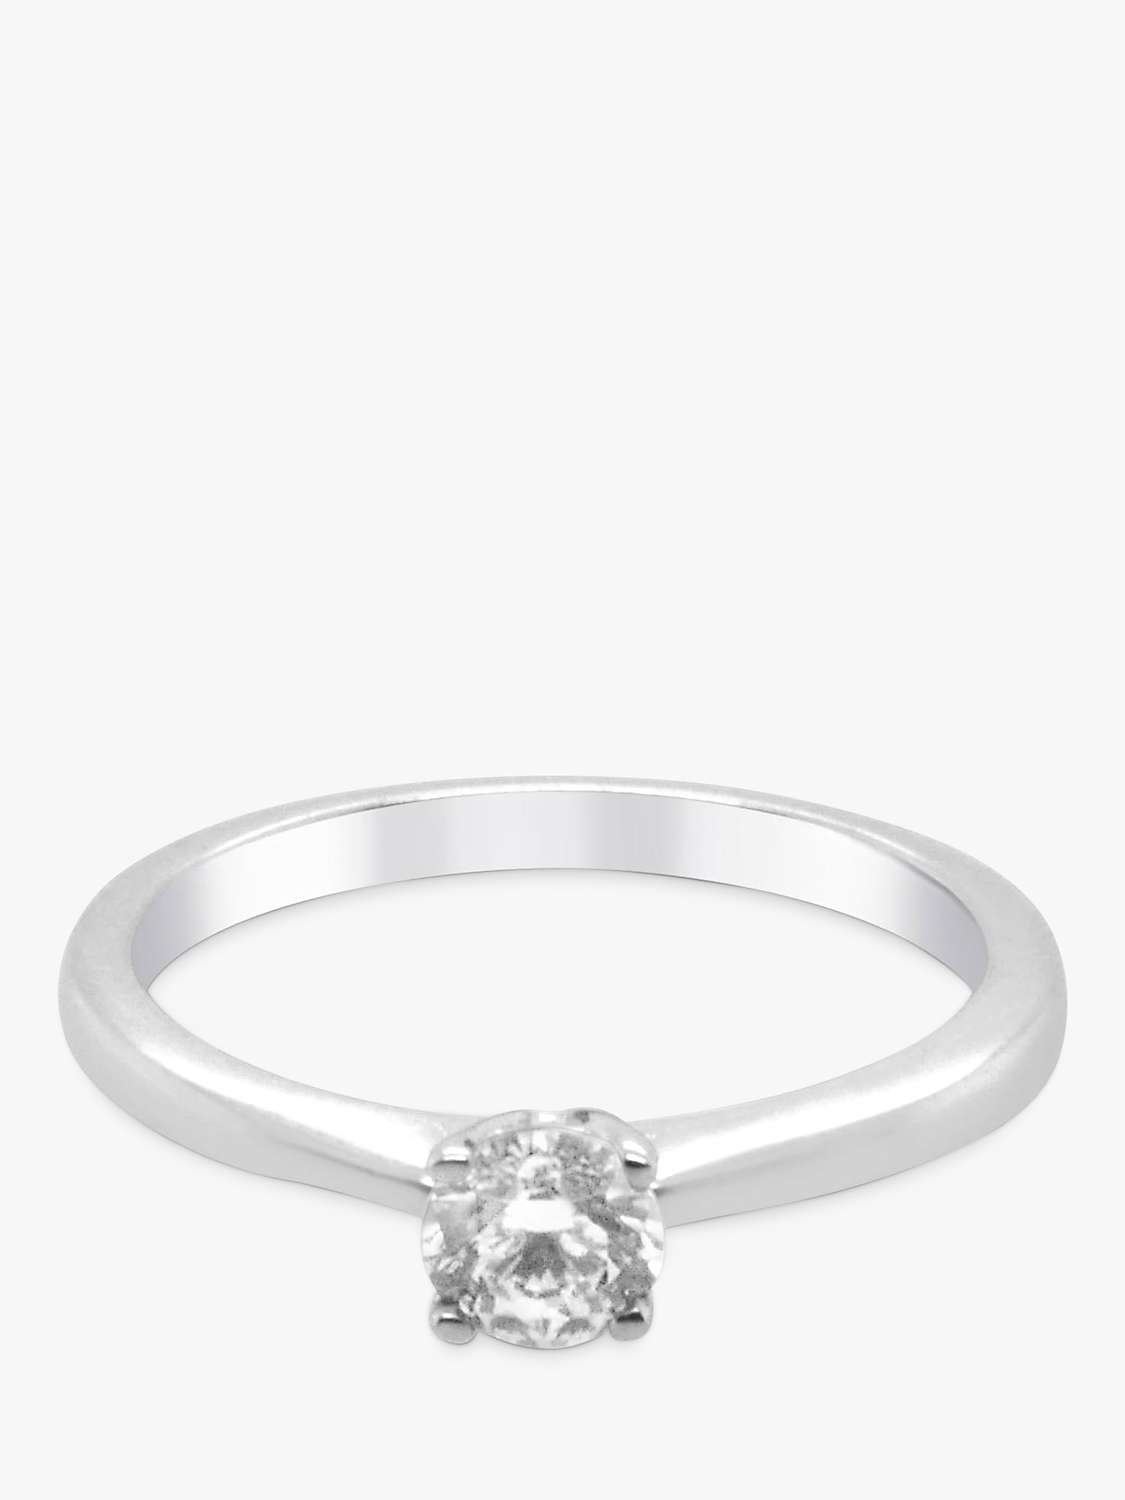 Buy Milton & Humble Jewellery Second Hand 18ct White Gold Solitaire Diamond Ring, Dated 2015 Online at johnlewis.com